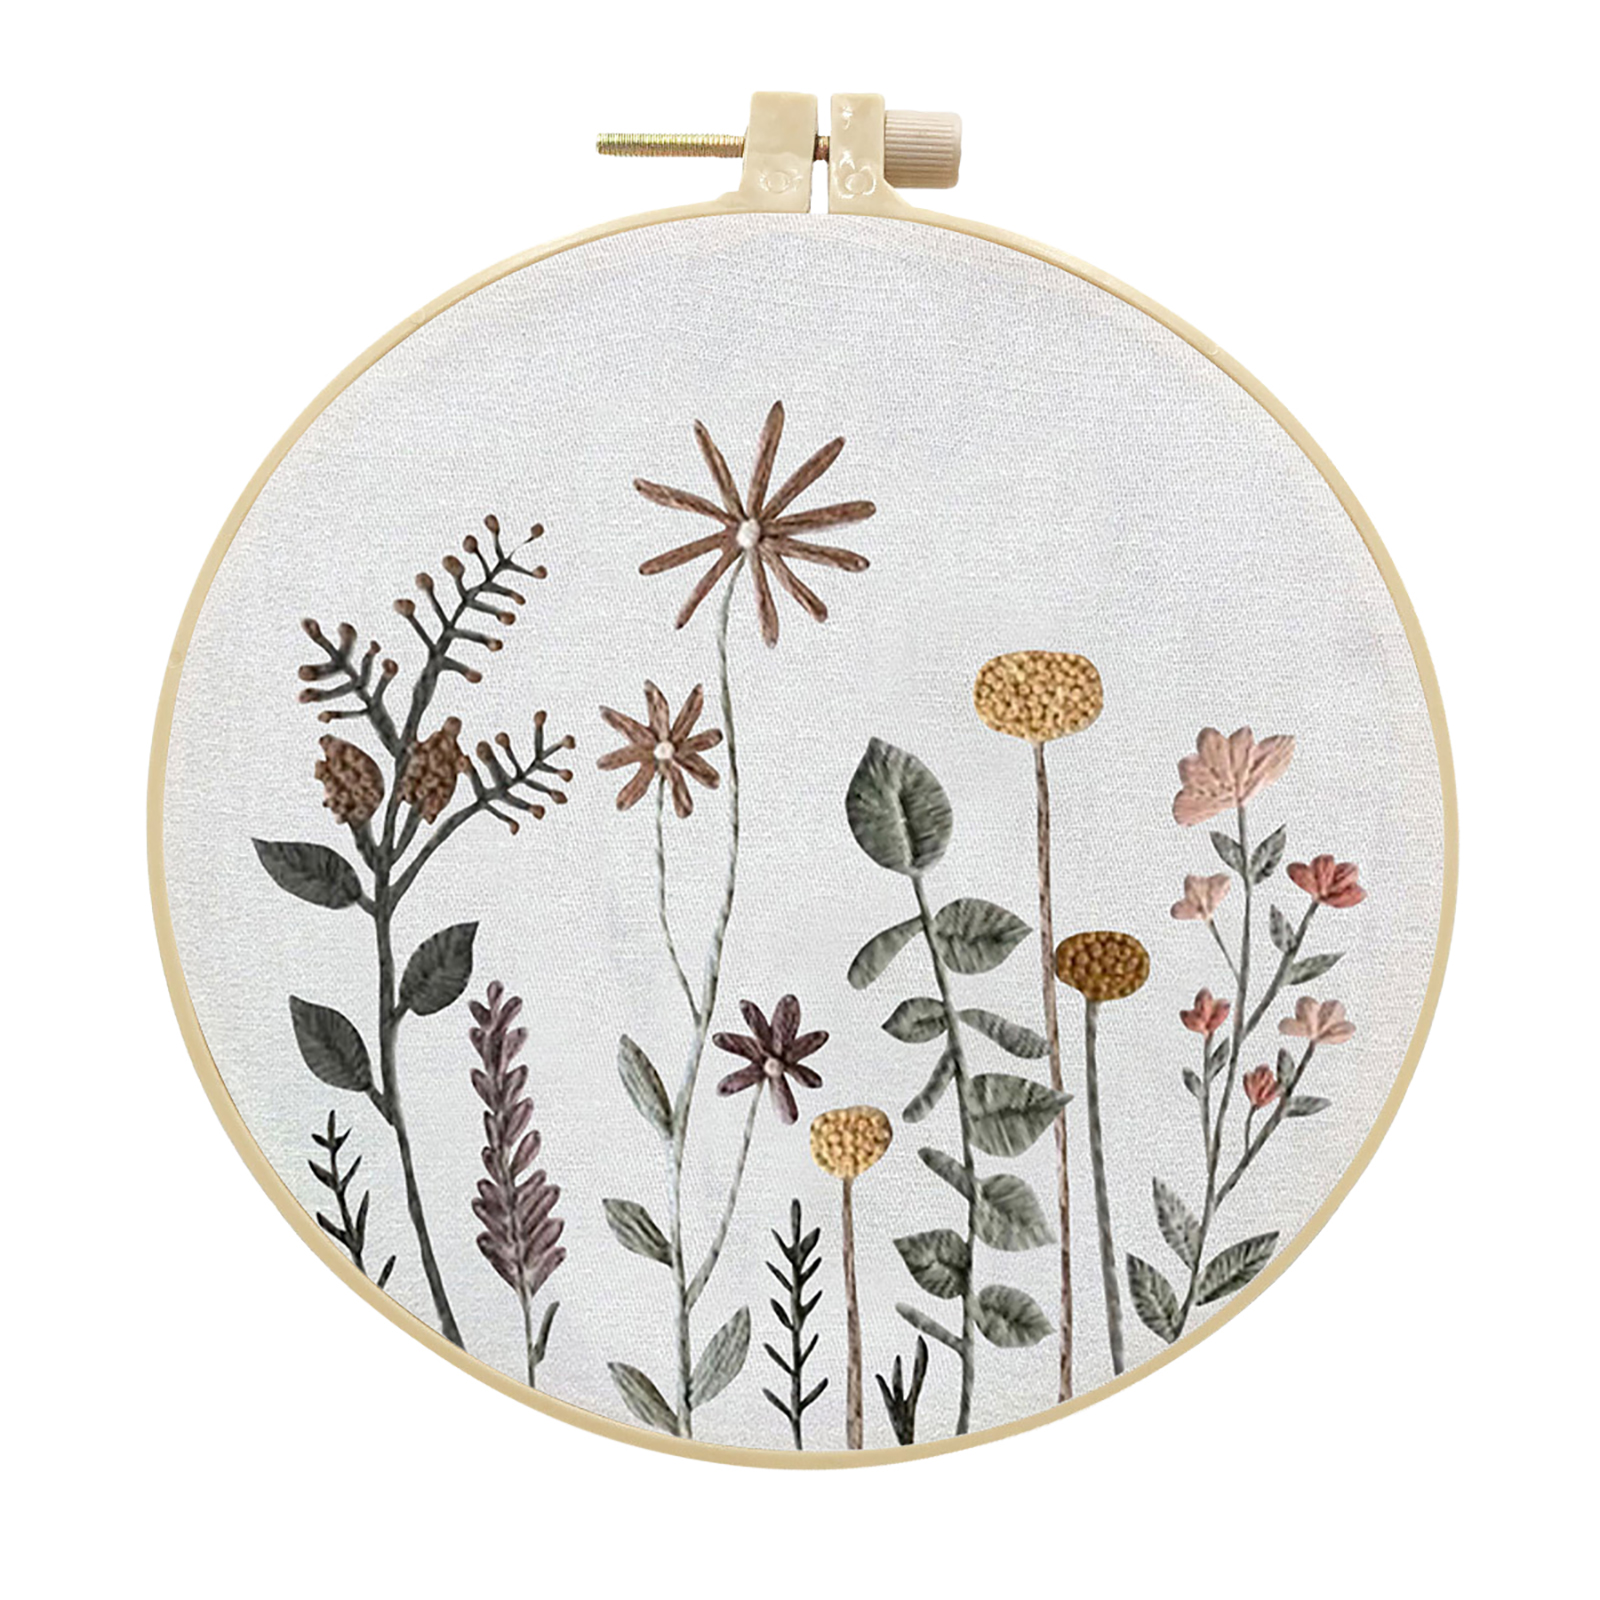 Embroidery Kits Cross stitch kits for Adult Beginner - Pretty flowers Pattern